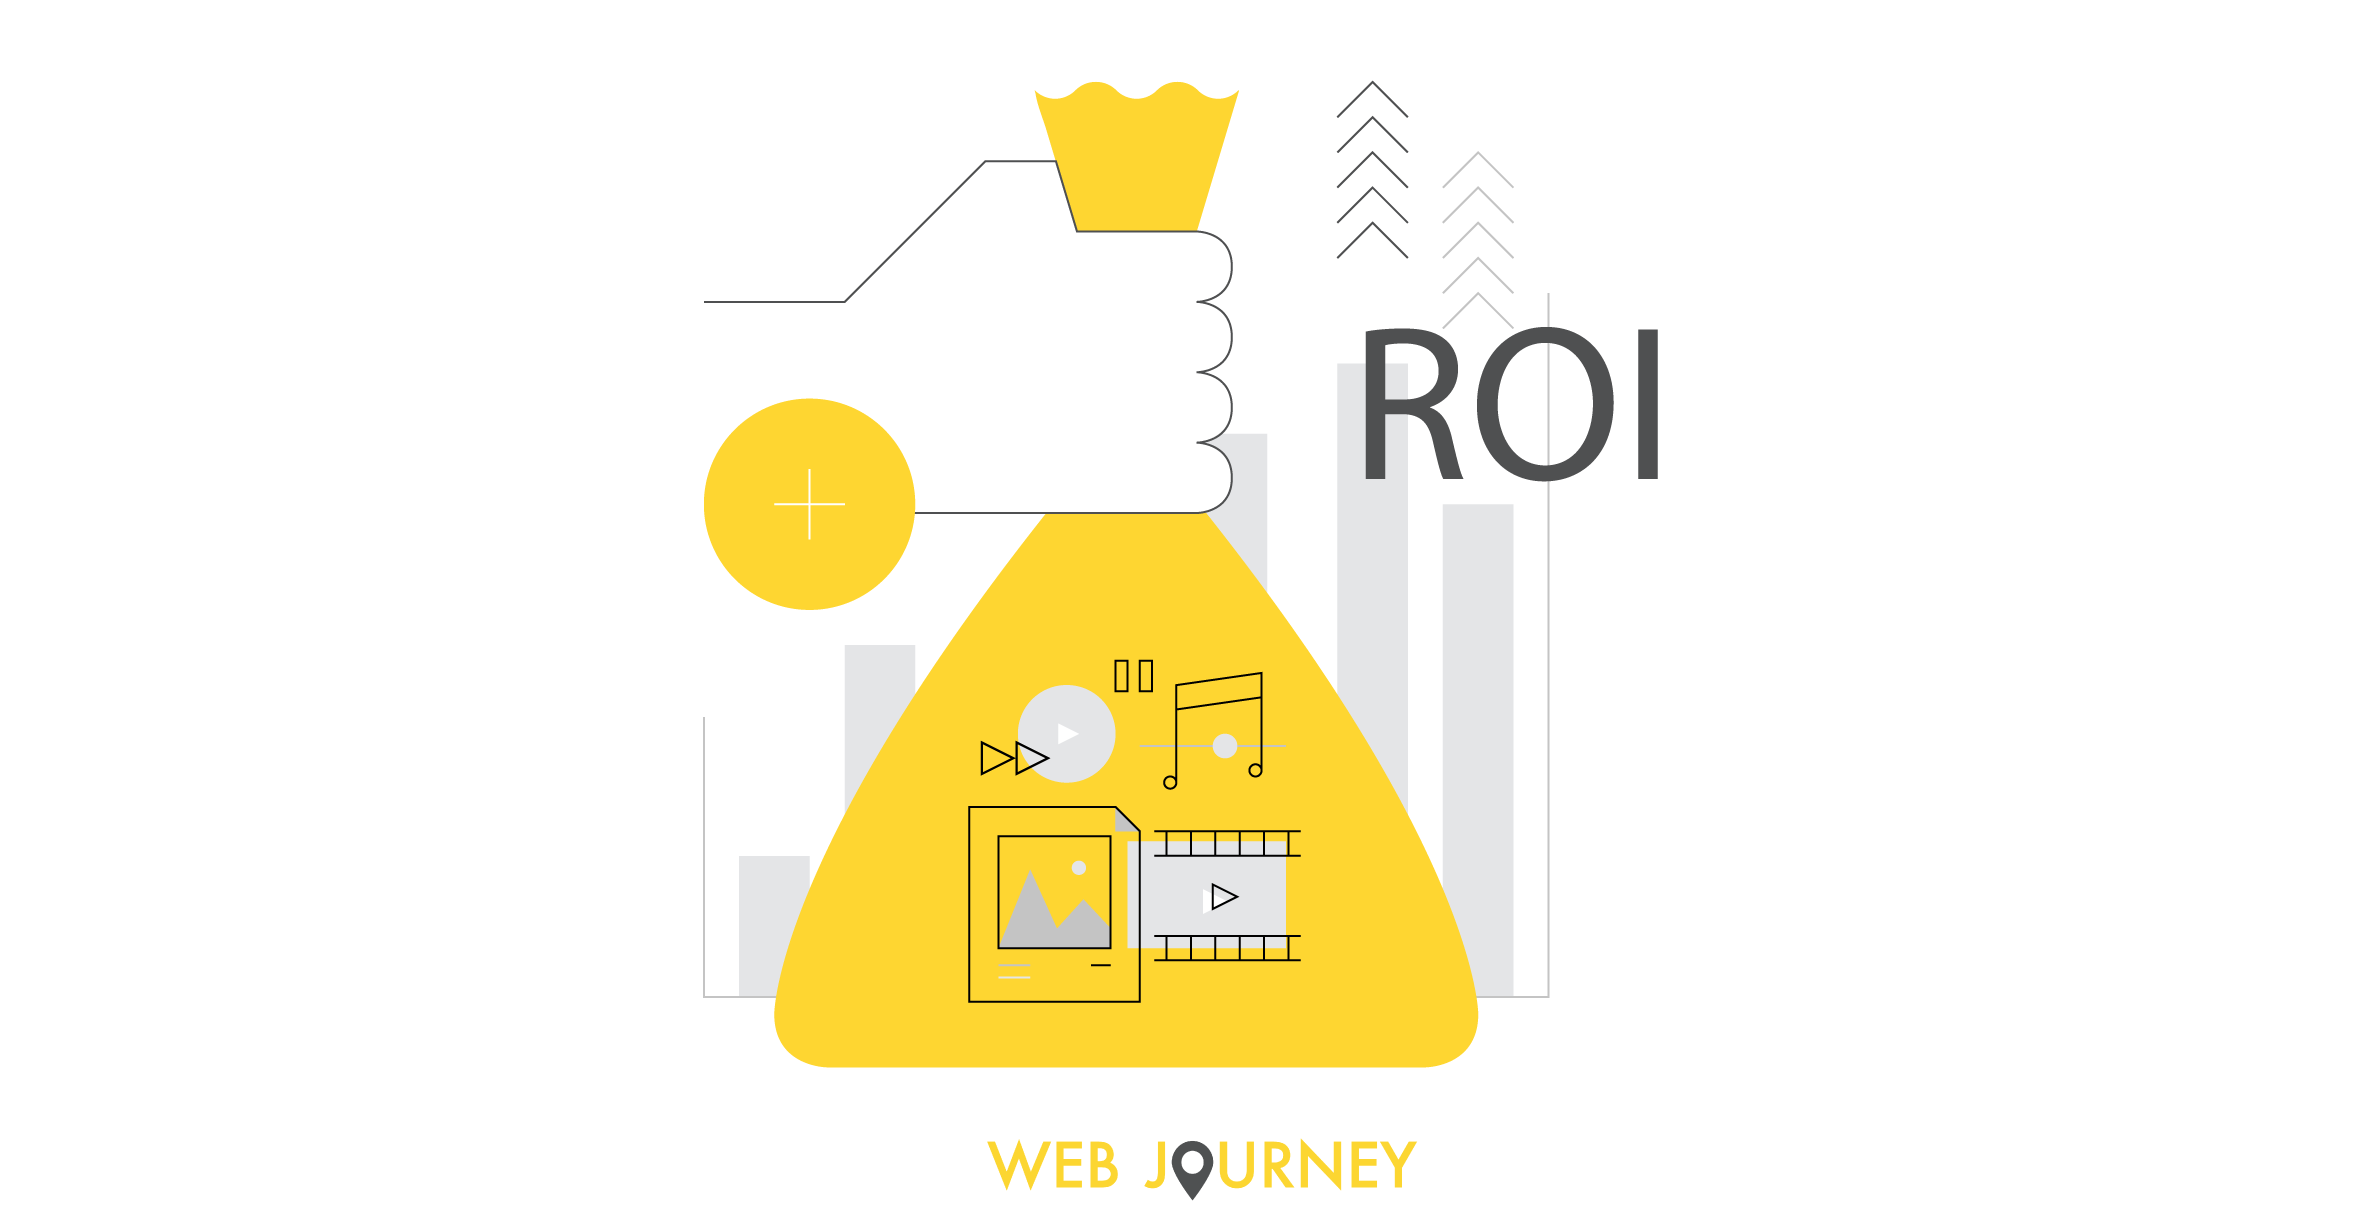 Money bag ROI illustration with marketing tactics in it like video